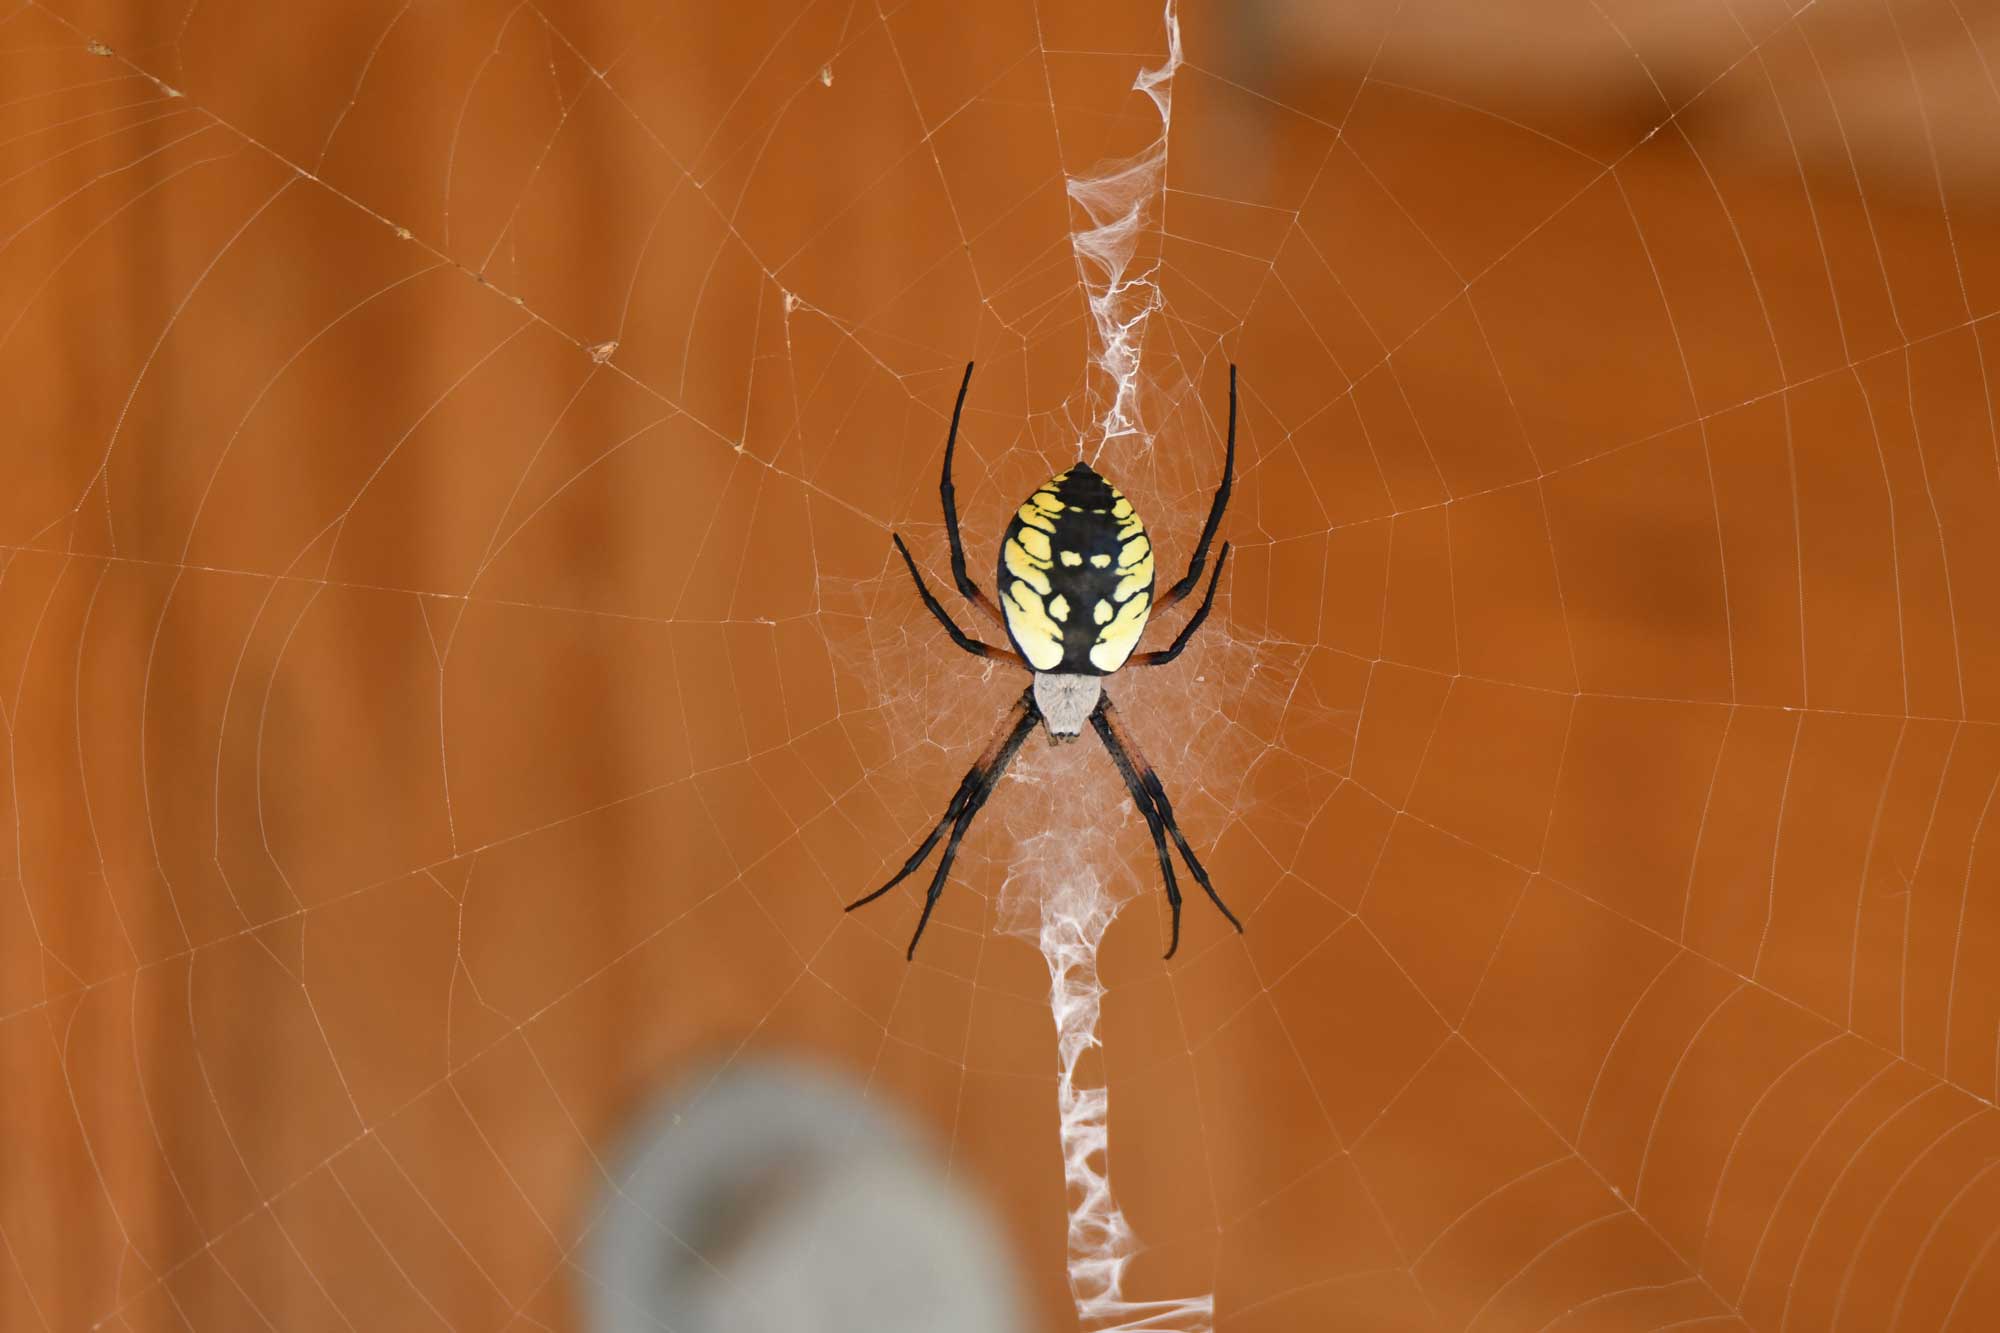 Myth buster: Spider silk is as strong as steel? It's not quite so simple